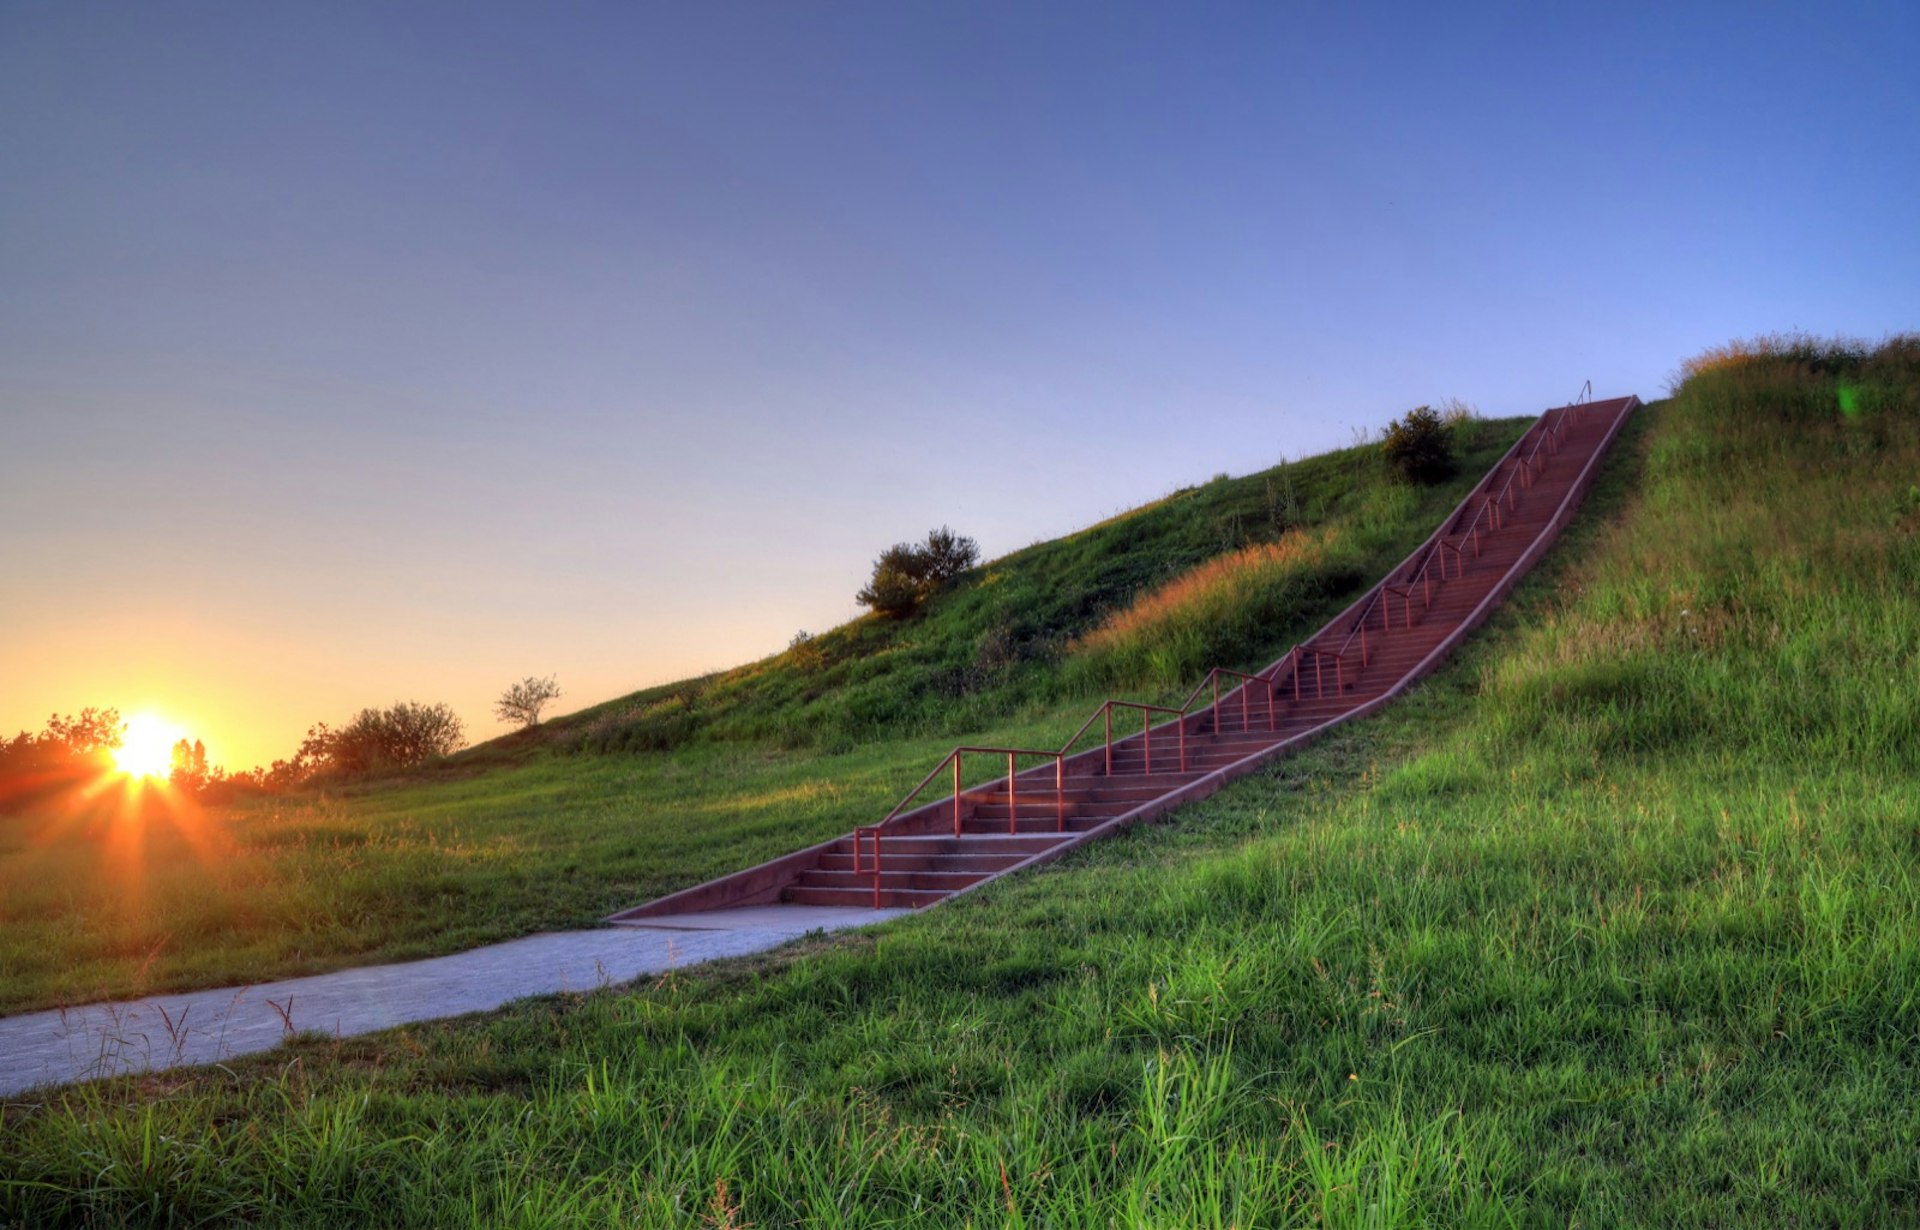 The sun sets behind a grassy mound with a staircase going up it. 